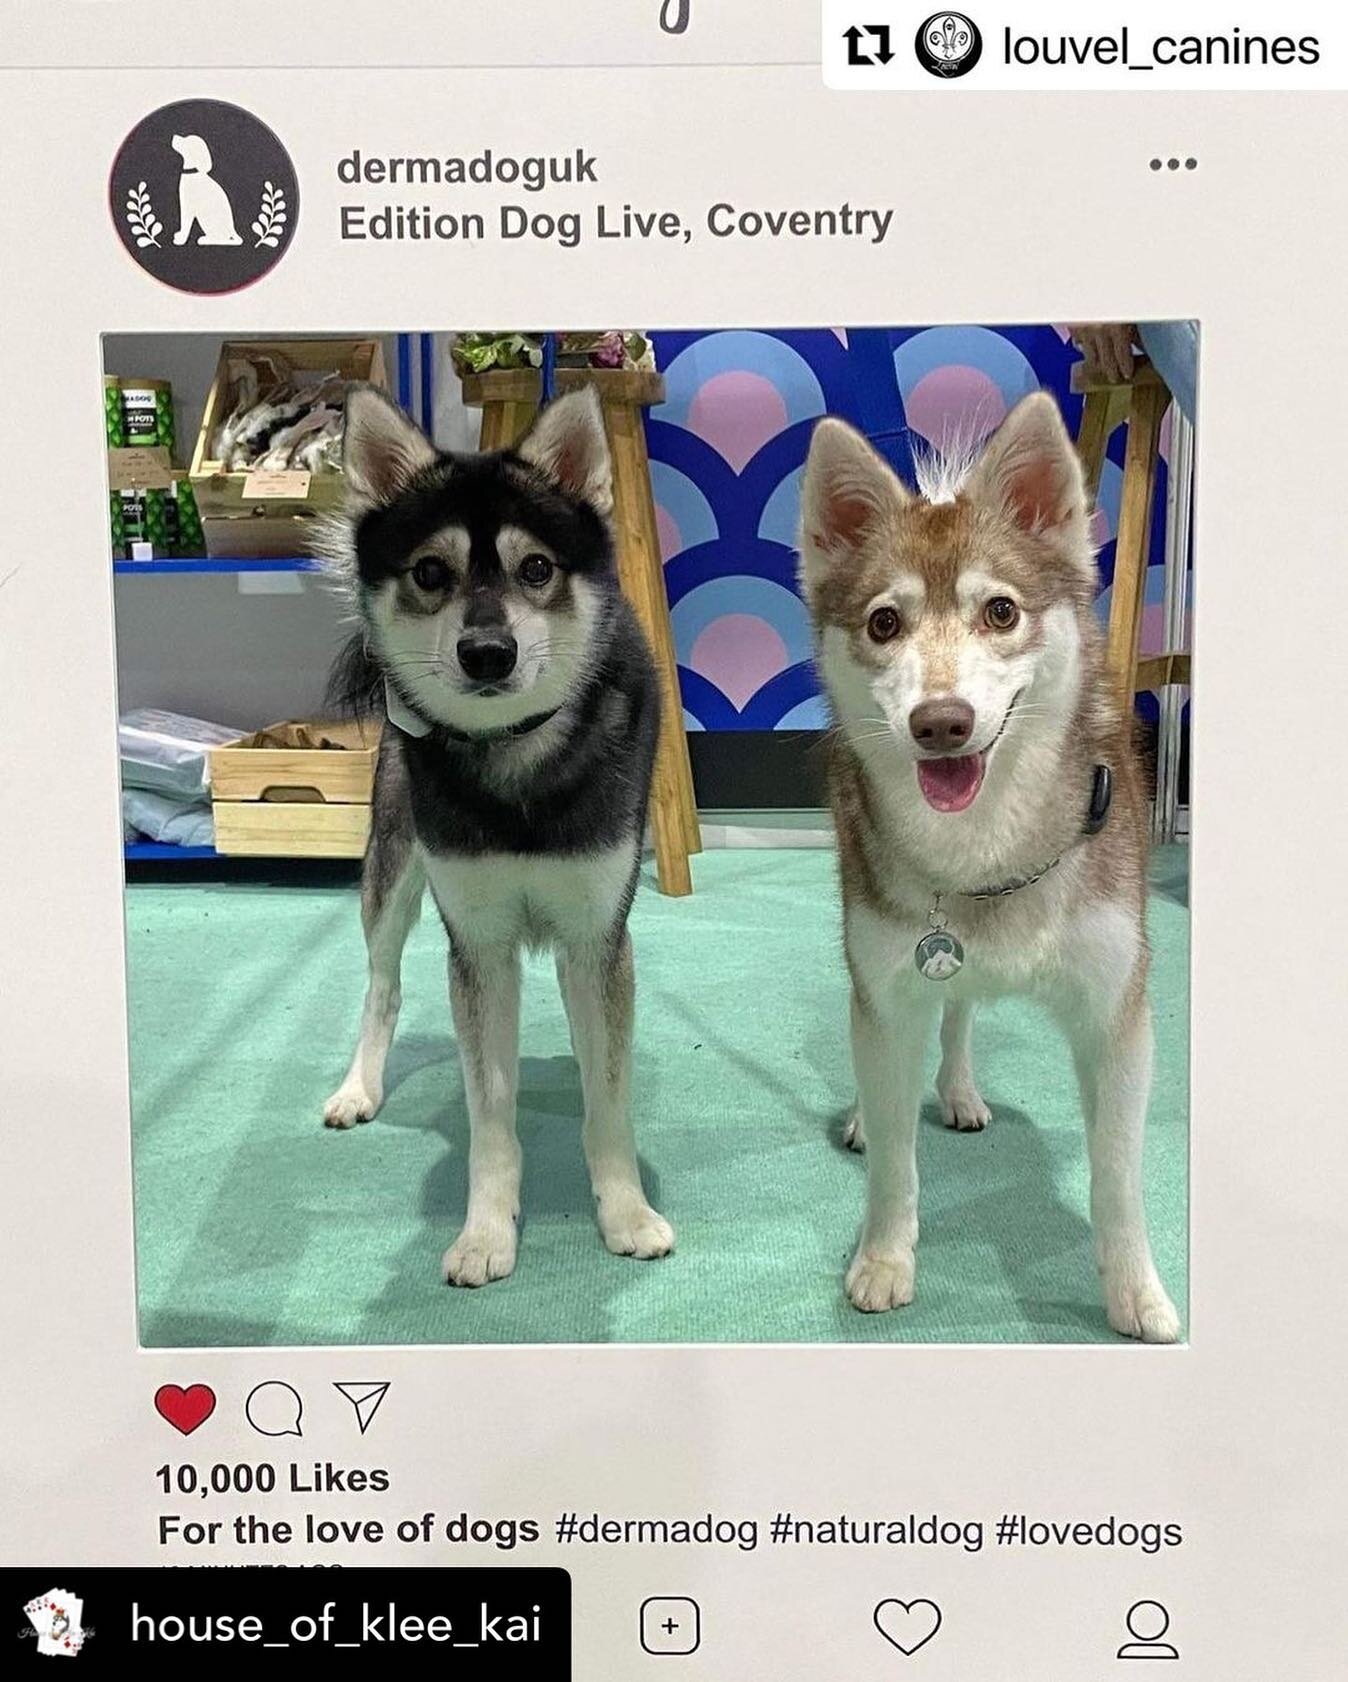 An honour to meet @house_of_klee_kai and @louvel_canines @editiondoglive 
・・・
We love @dermadoguk and got to visit their stall at @editiondoglive!
&mdash;&mdash;&mdash;
@akkaoa @akkaob